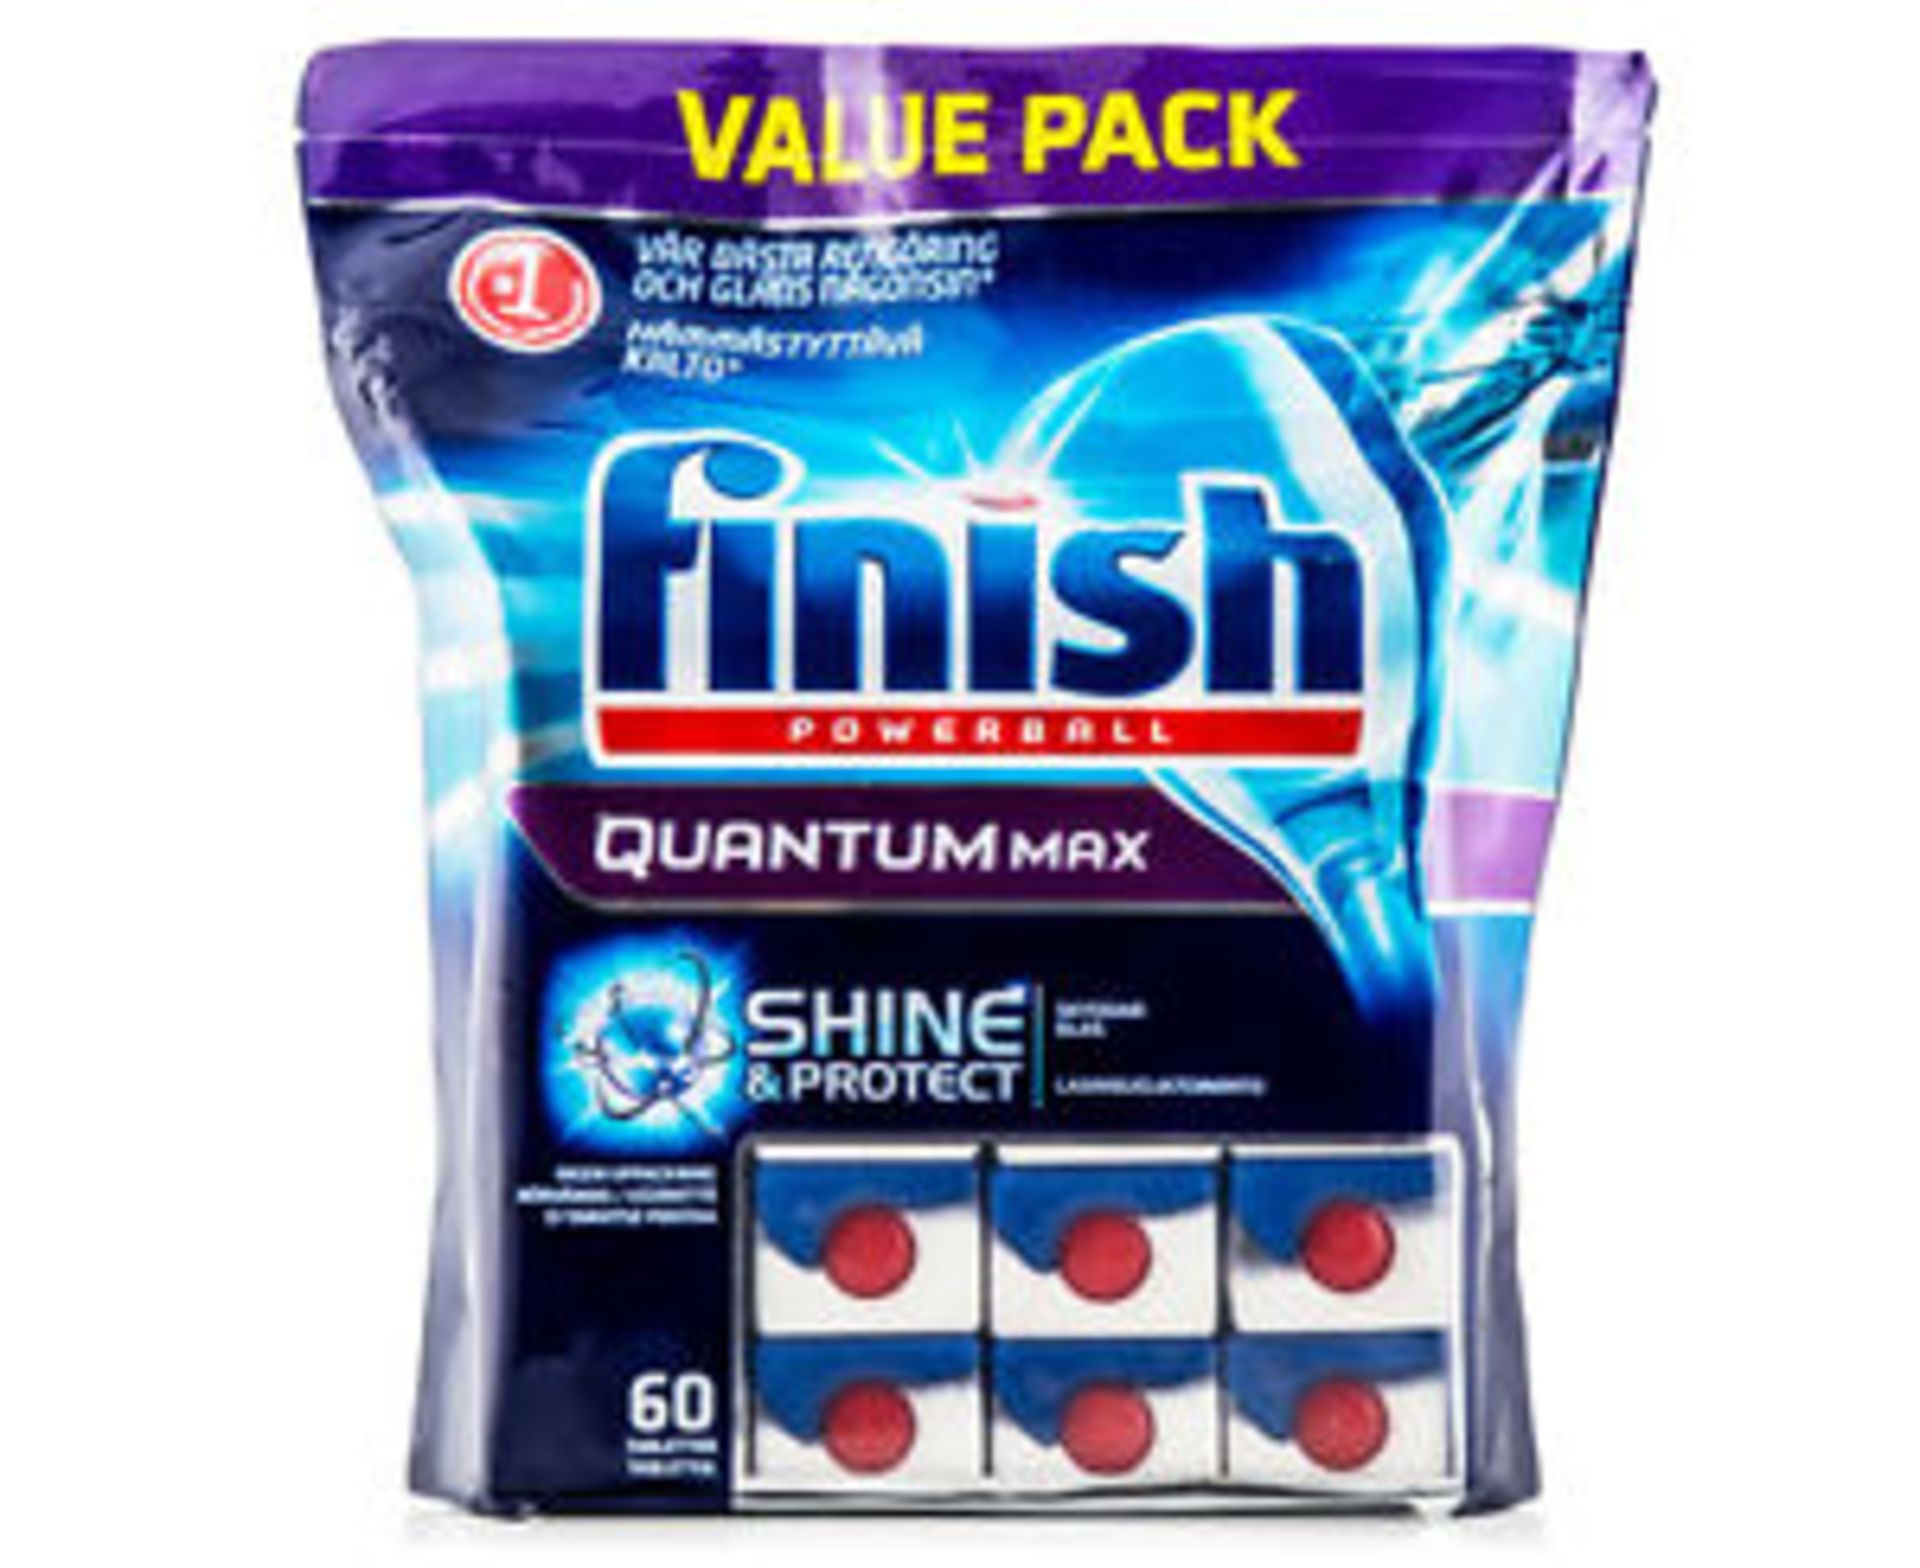 V Brand New Finish Powerball Quantum Max With Shine & Protect XL 60 Pack Total ISP £33.70 inc